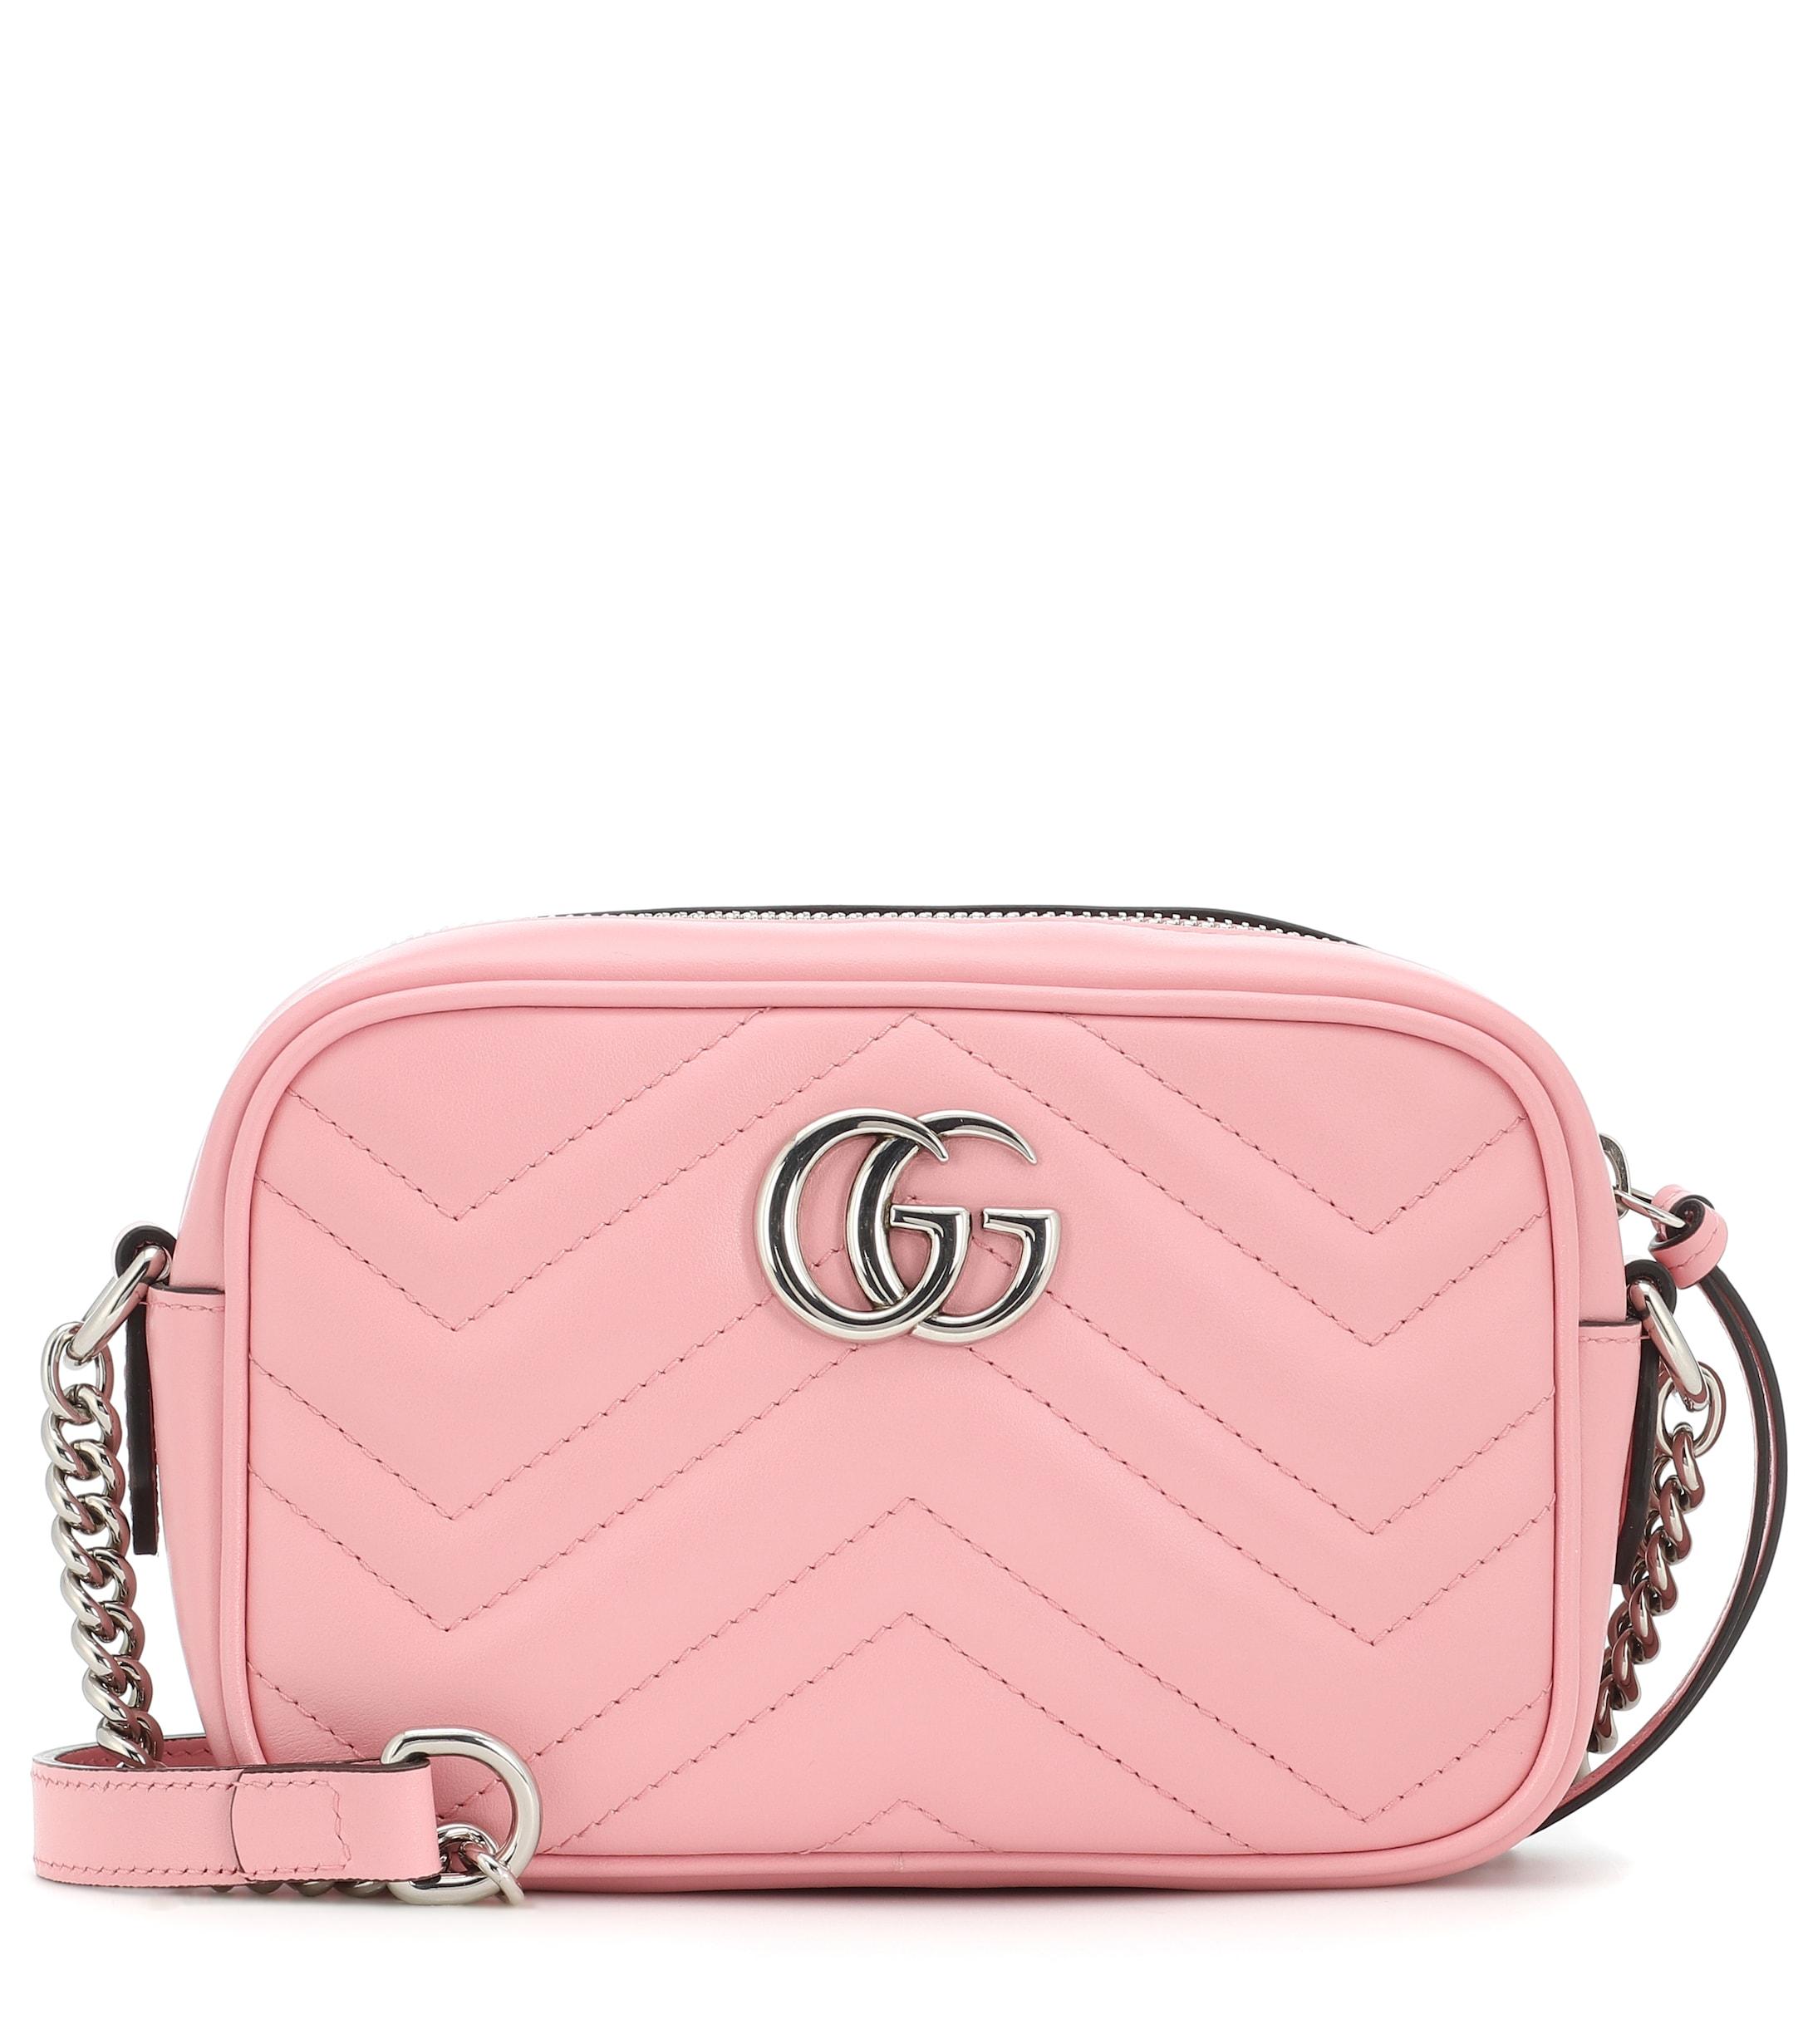 Gucci Leather GG Marmont Mini Crossbody Bag in Pink - Lyst